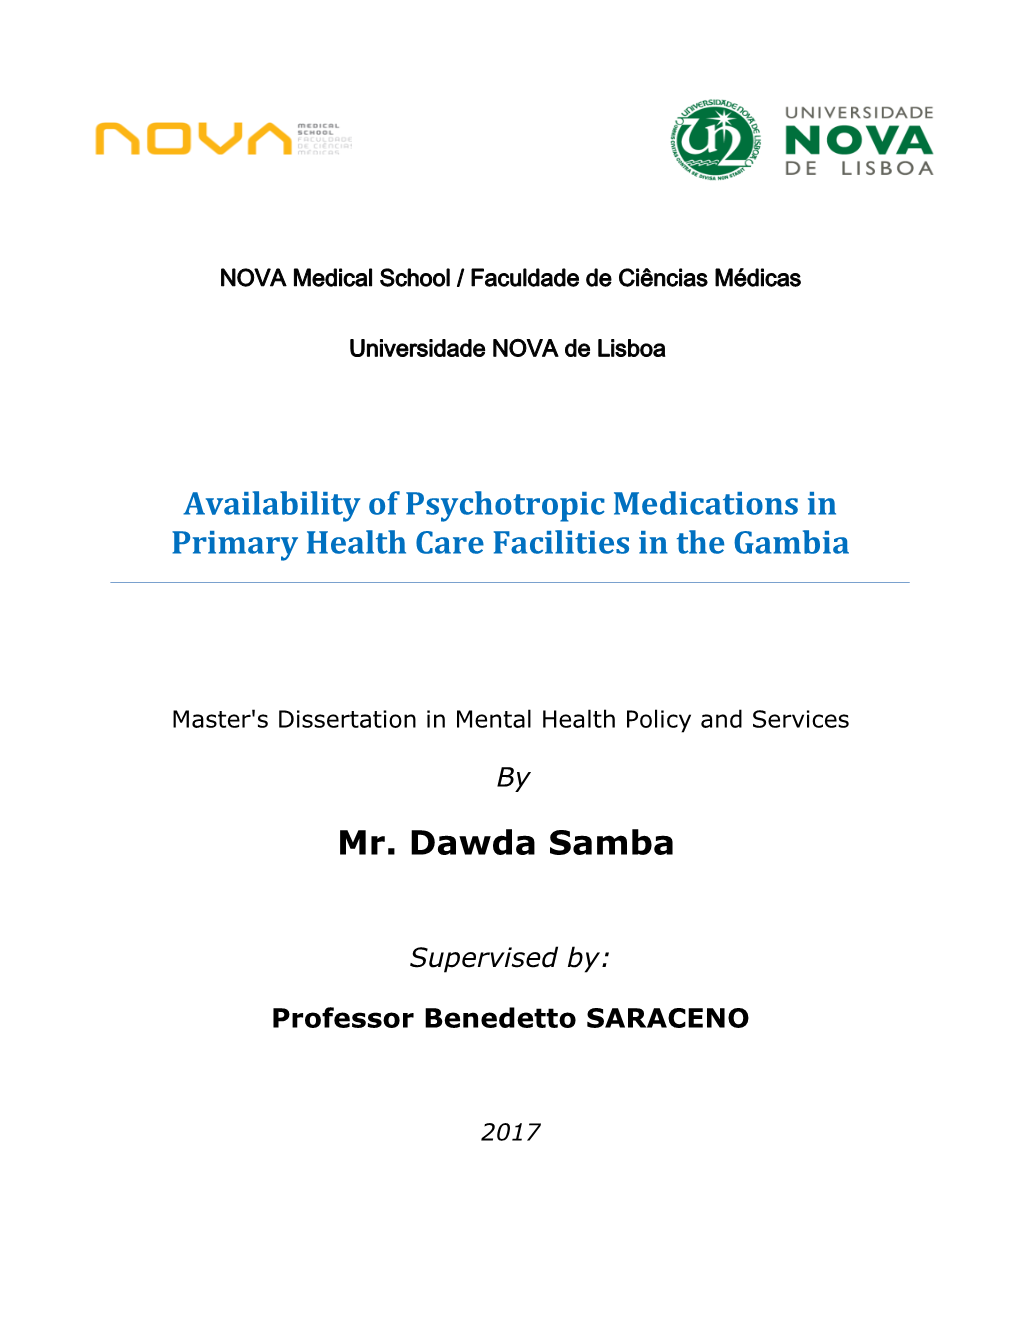 Availability of Psychotropic Medications in Primary Health Care Facilities in the Gambia